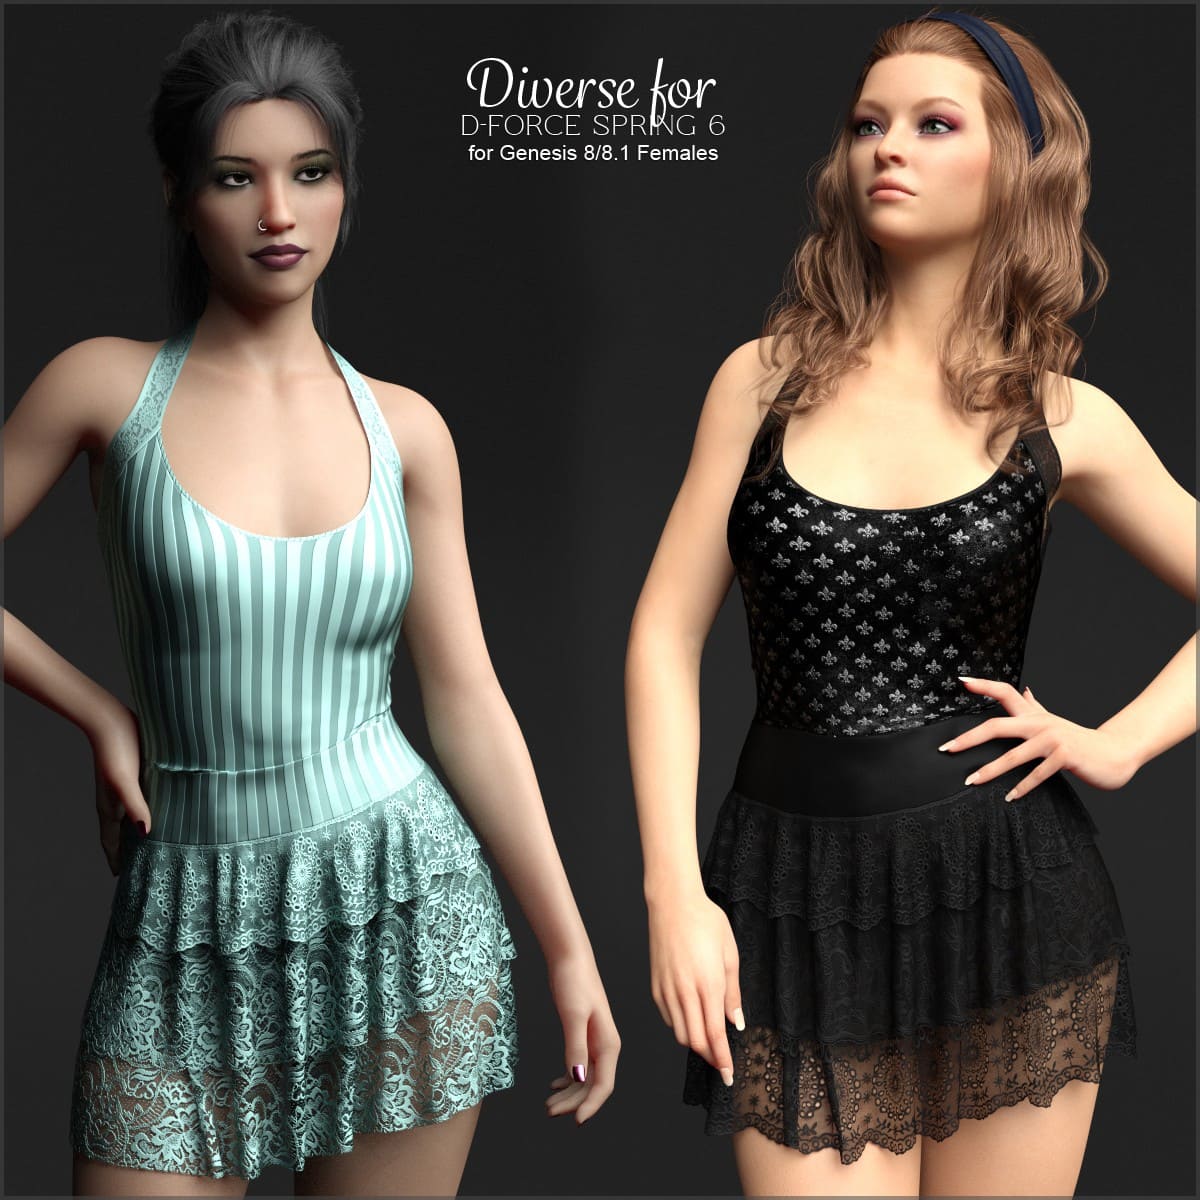 Diverse for Spring 6 for G8F and G8.1F_DAZ3DDL